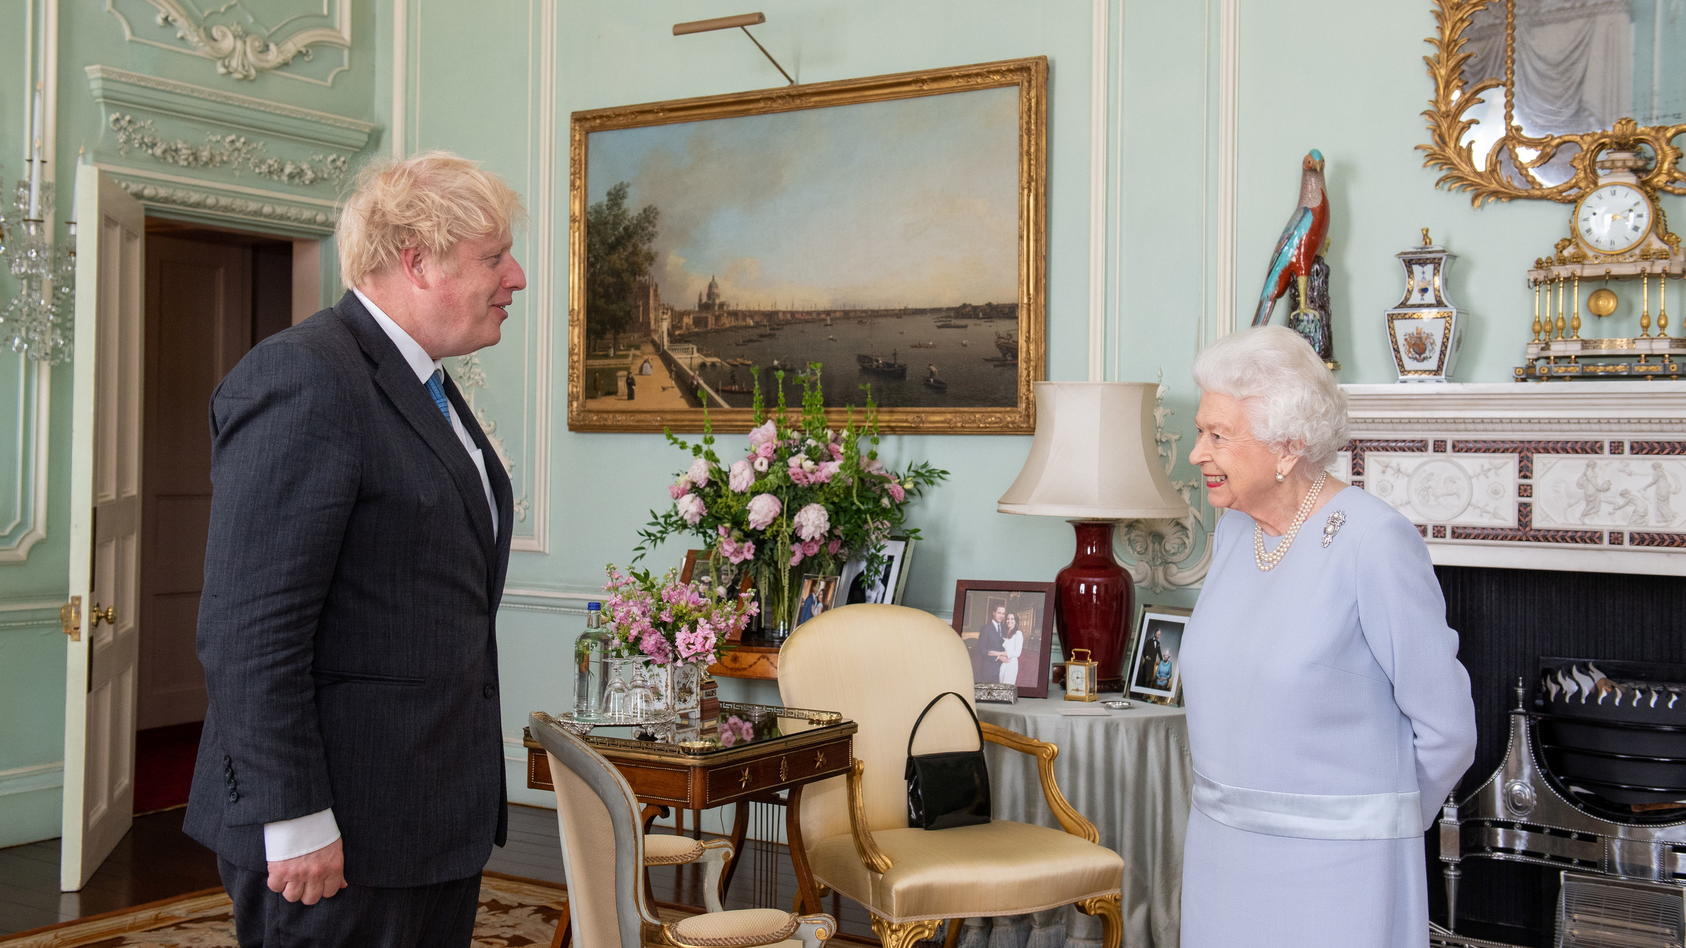 Britain's Queen Elizabeth II greets Prime Minister Boris Johnson at the first in-person weekly audience with the Prime Minister since the start of the coronavirus pandemic, at Buckingham Palace in London, Briain June 23, 2021. Dominic Lipinski/Pool v